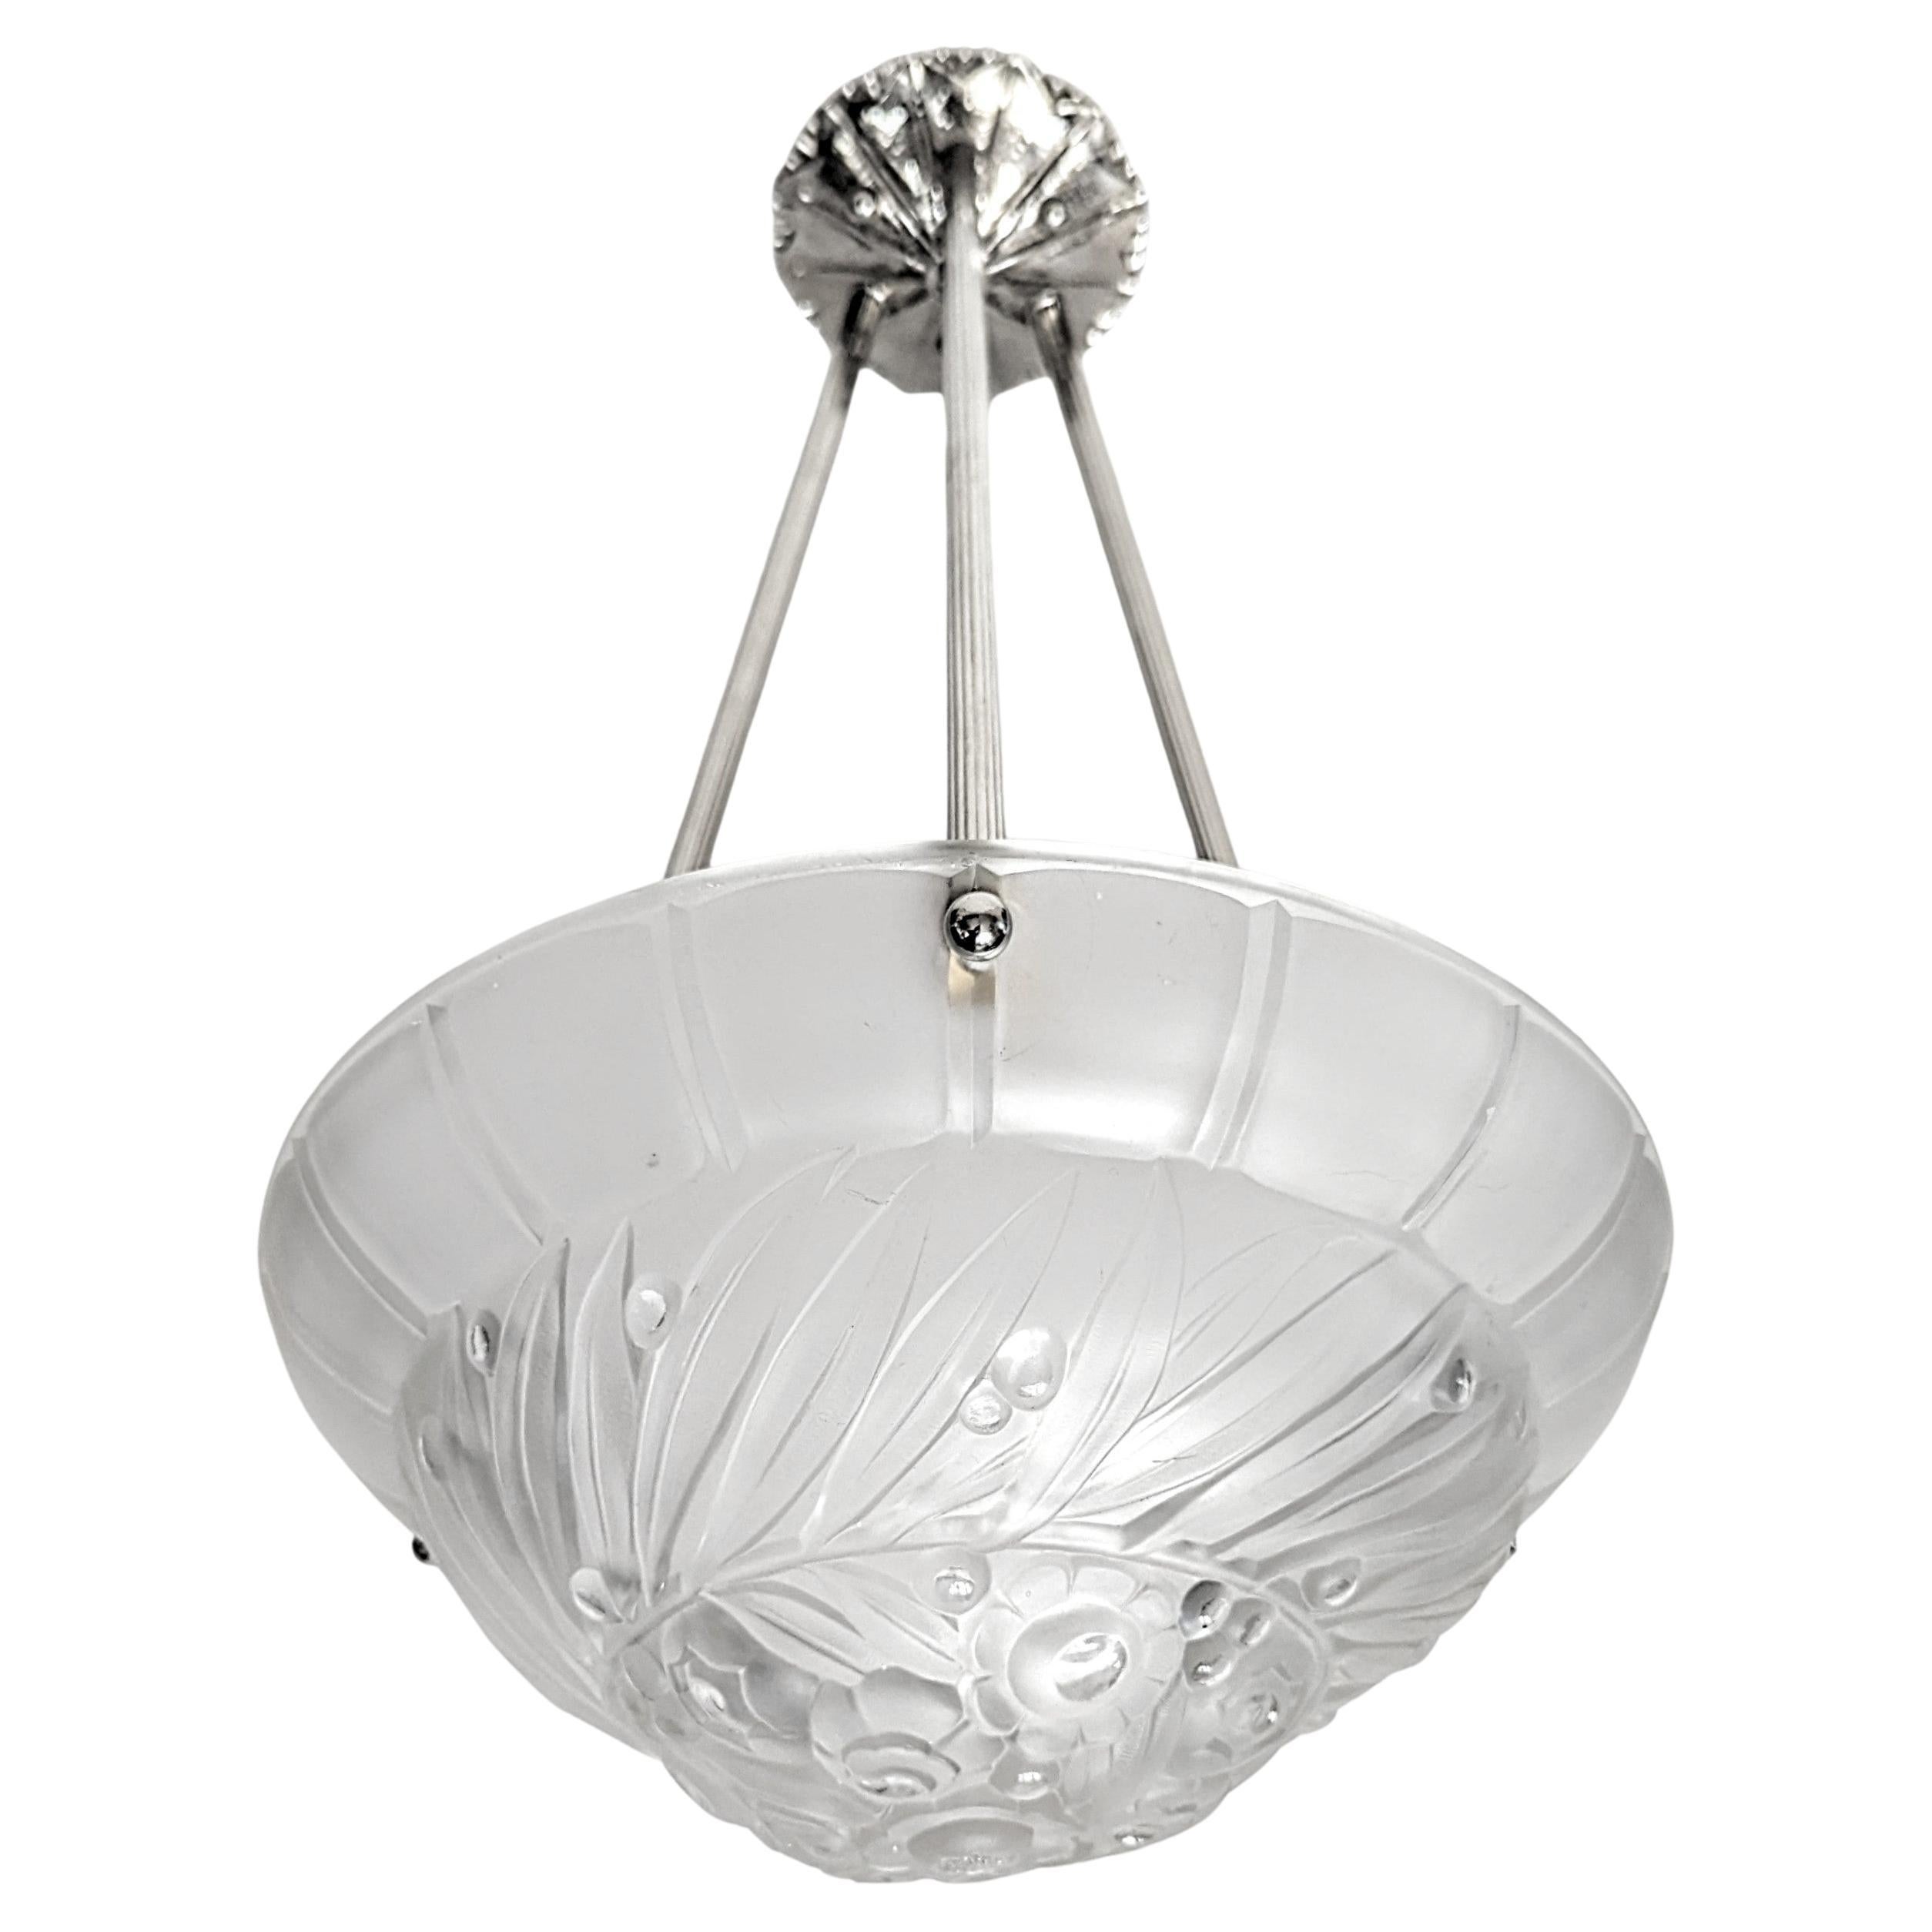 A French Art Deco pendant chandelier in great condition. Clear frosted molded glass shade with intricate flower polished motif details held by three ribbed rods with a matching canopy. The fixture has been re-plated in nickel and rewired for U.S.